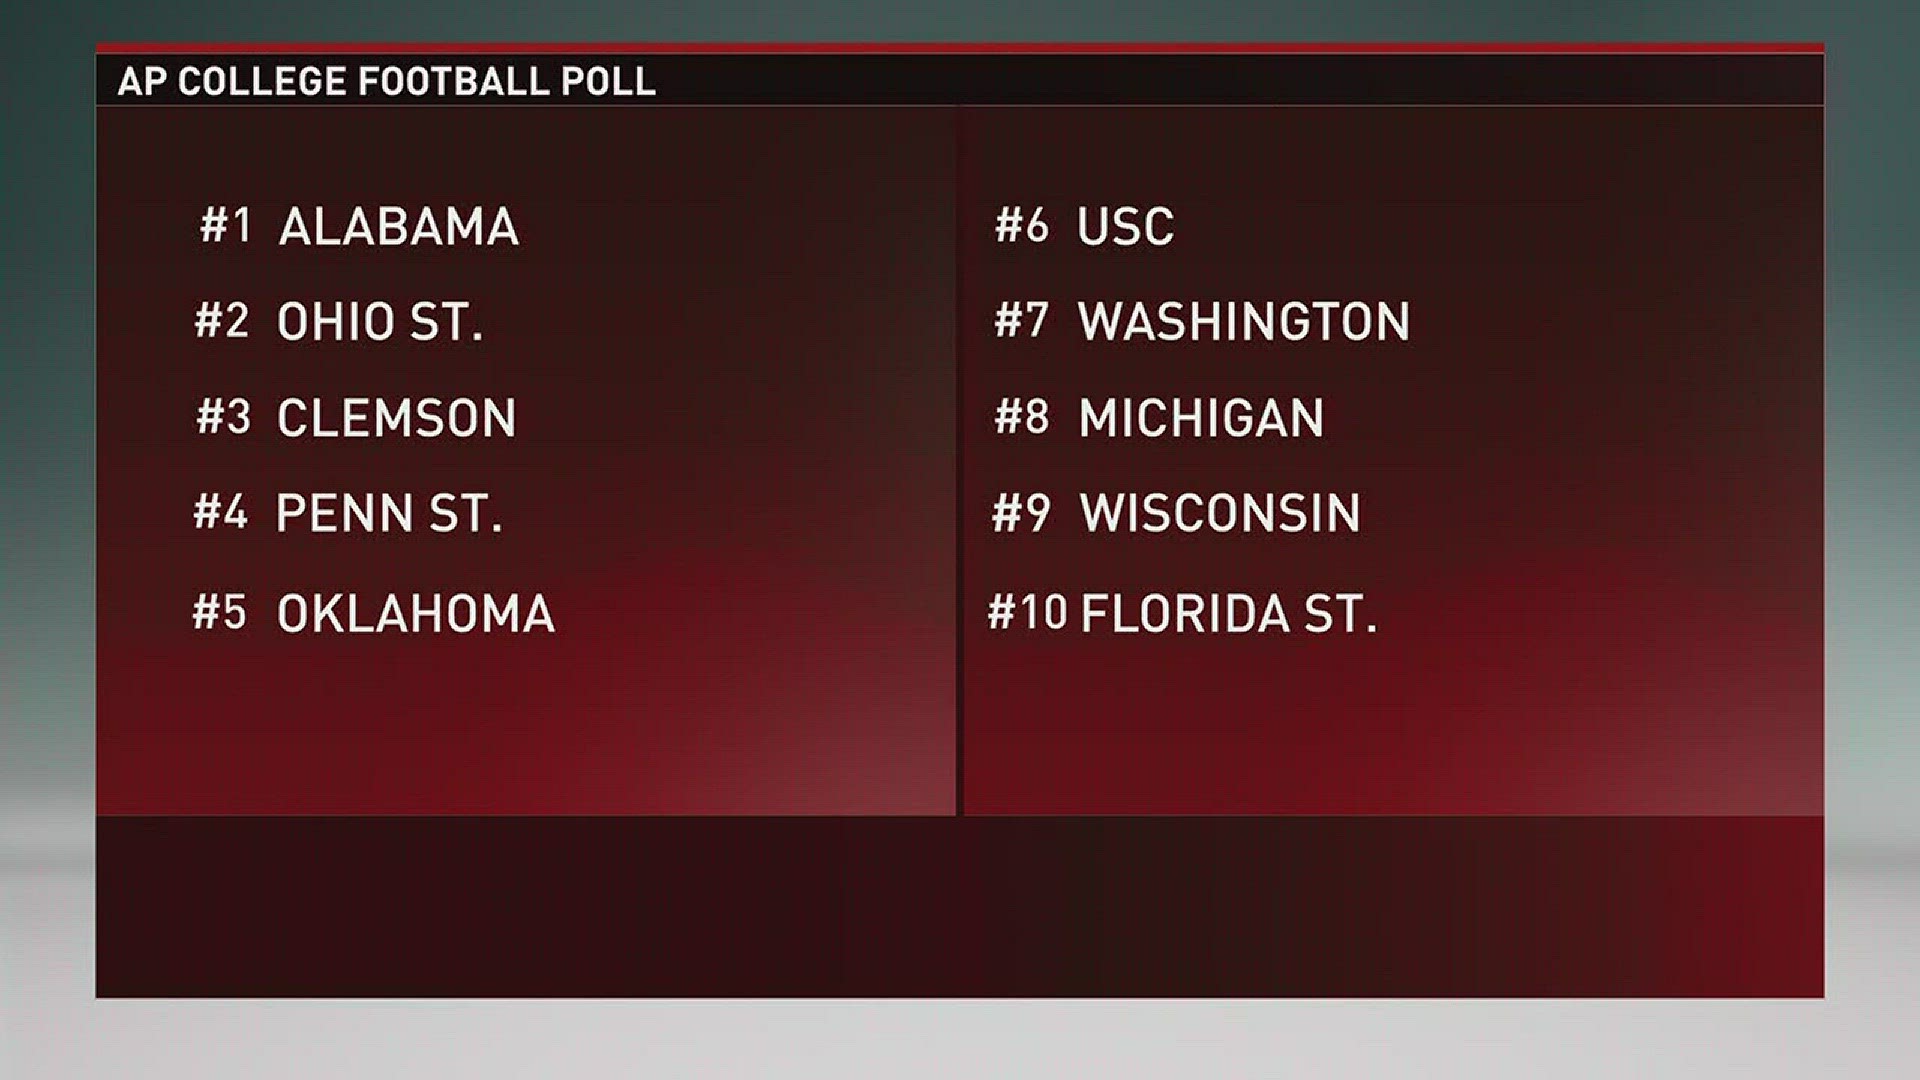 UM moves up the polls